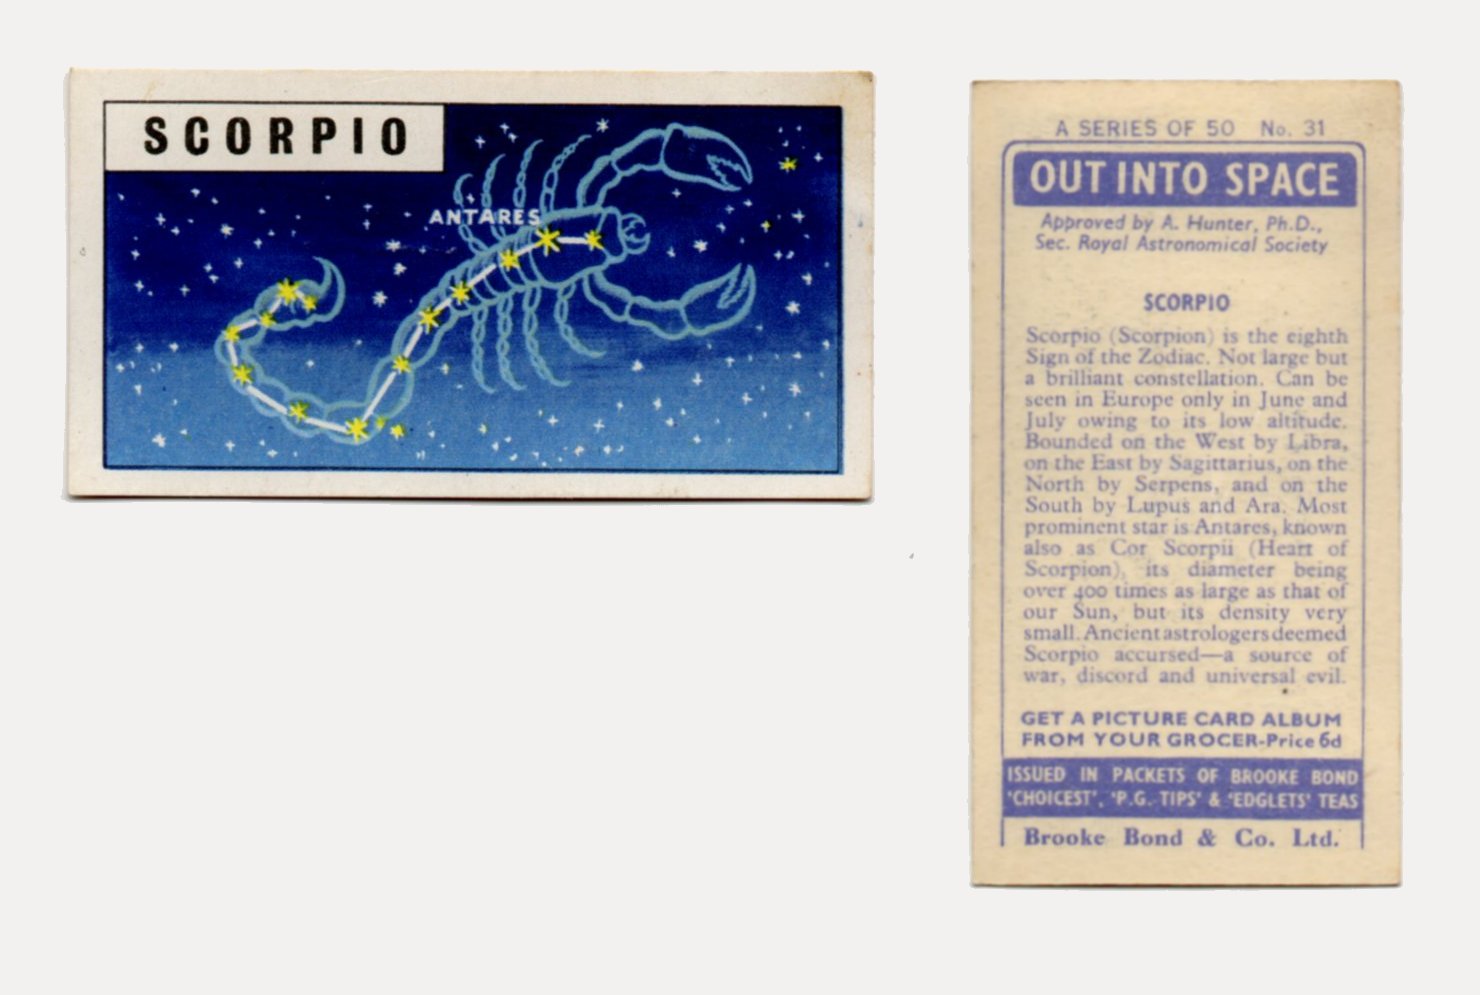 Brooke Bond Out Into Space #31 Scorpio CC0251.jpg  by whitetaylor